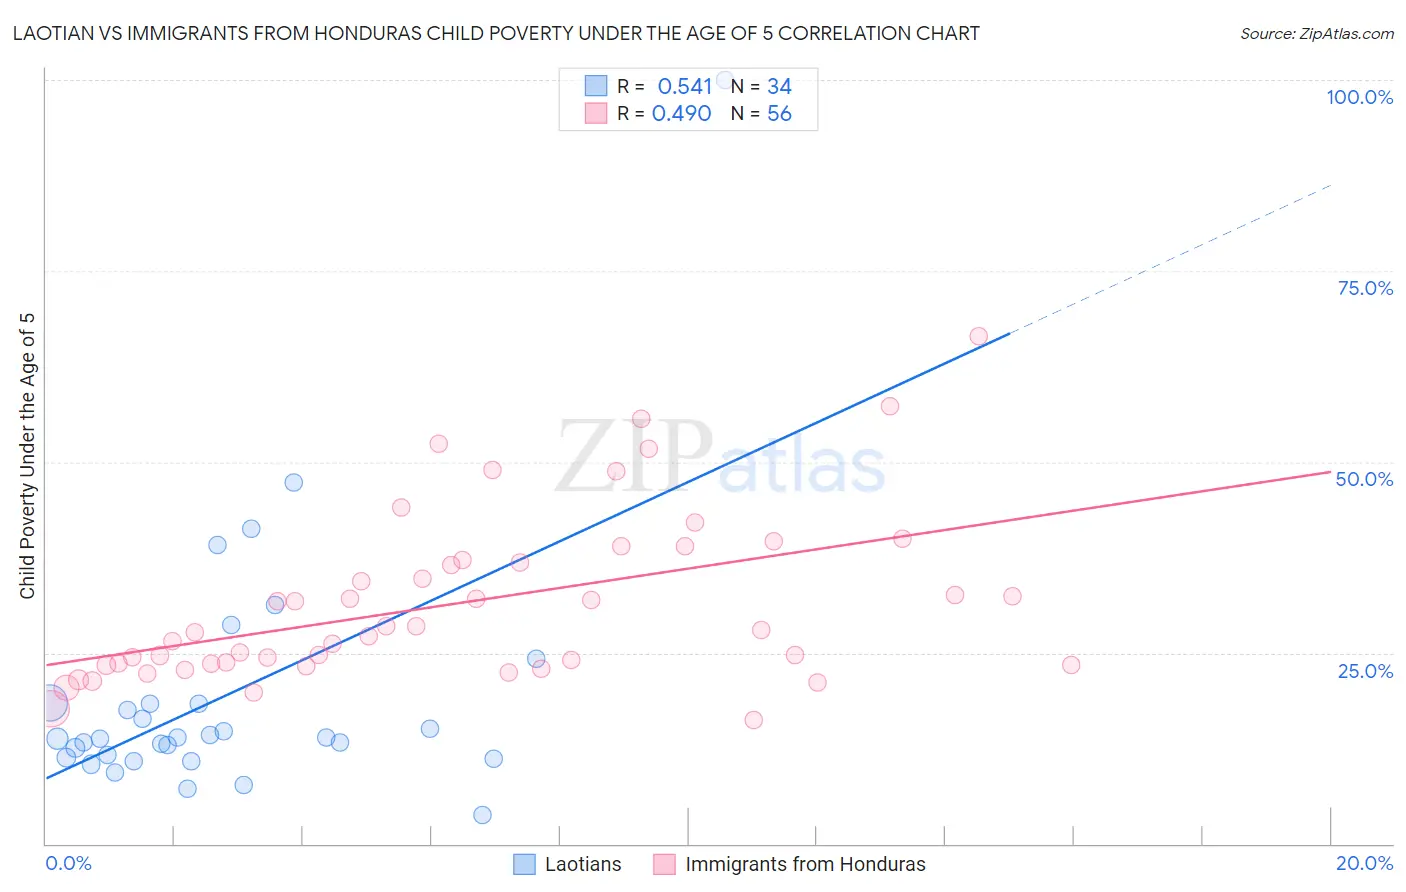 Laotian vs Immigrants from Honduras Child Poverty Under the Age of 5